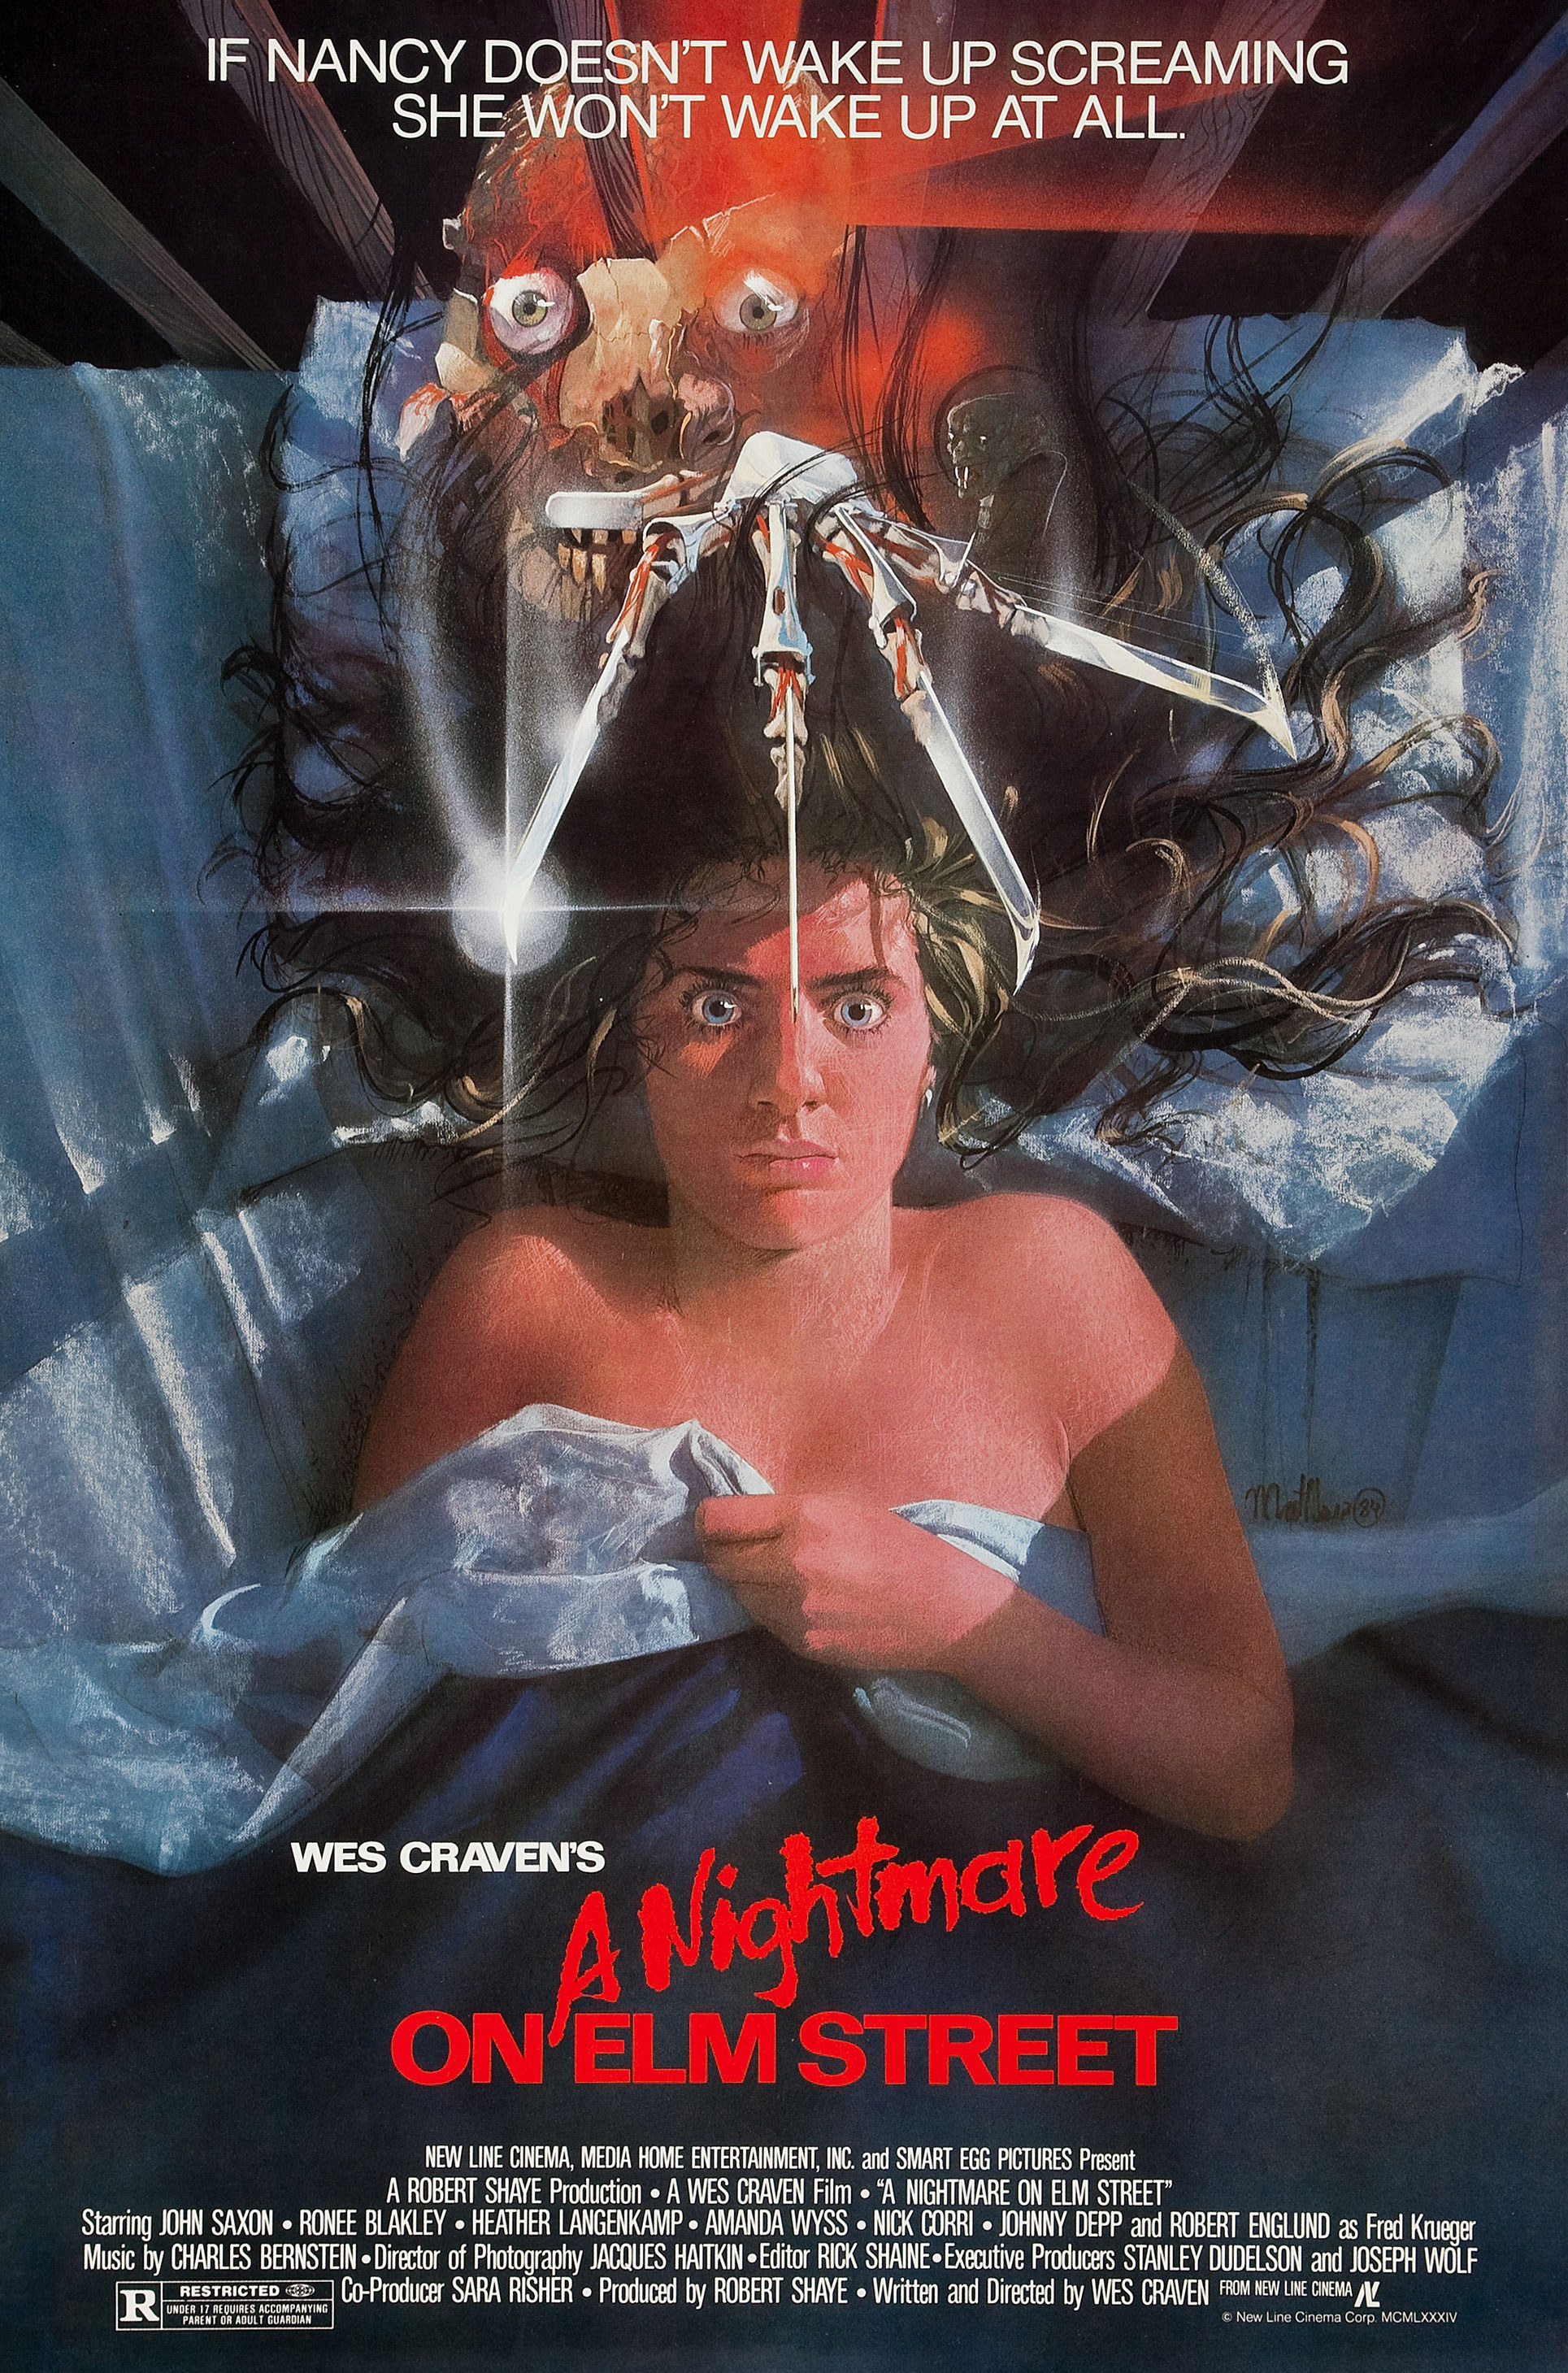 The official &quot;A Nightmare on Elm Street&quot; poster which features Nancy asleep in her bed with Freddy Krueger hovering over her, claws spread